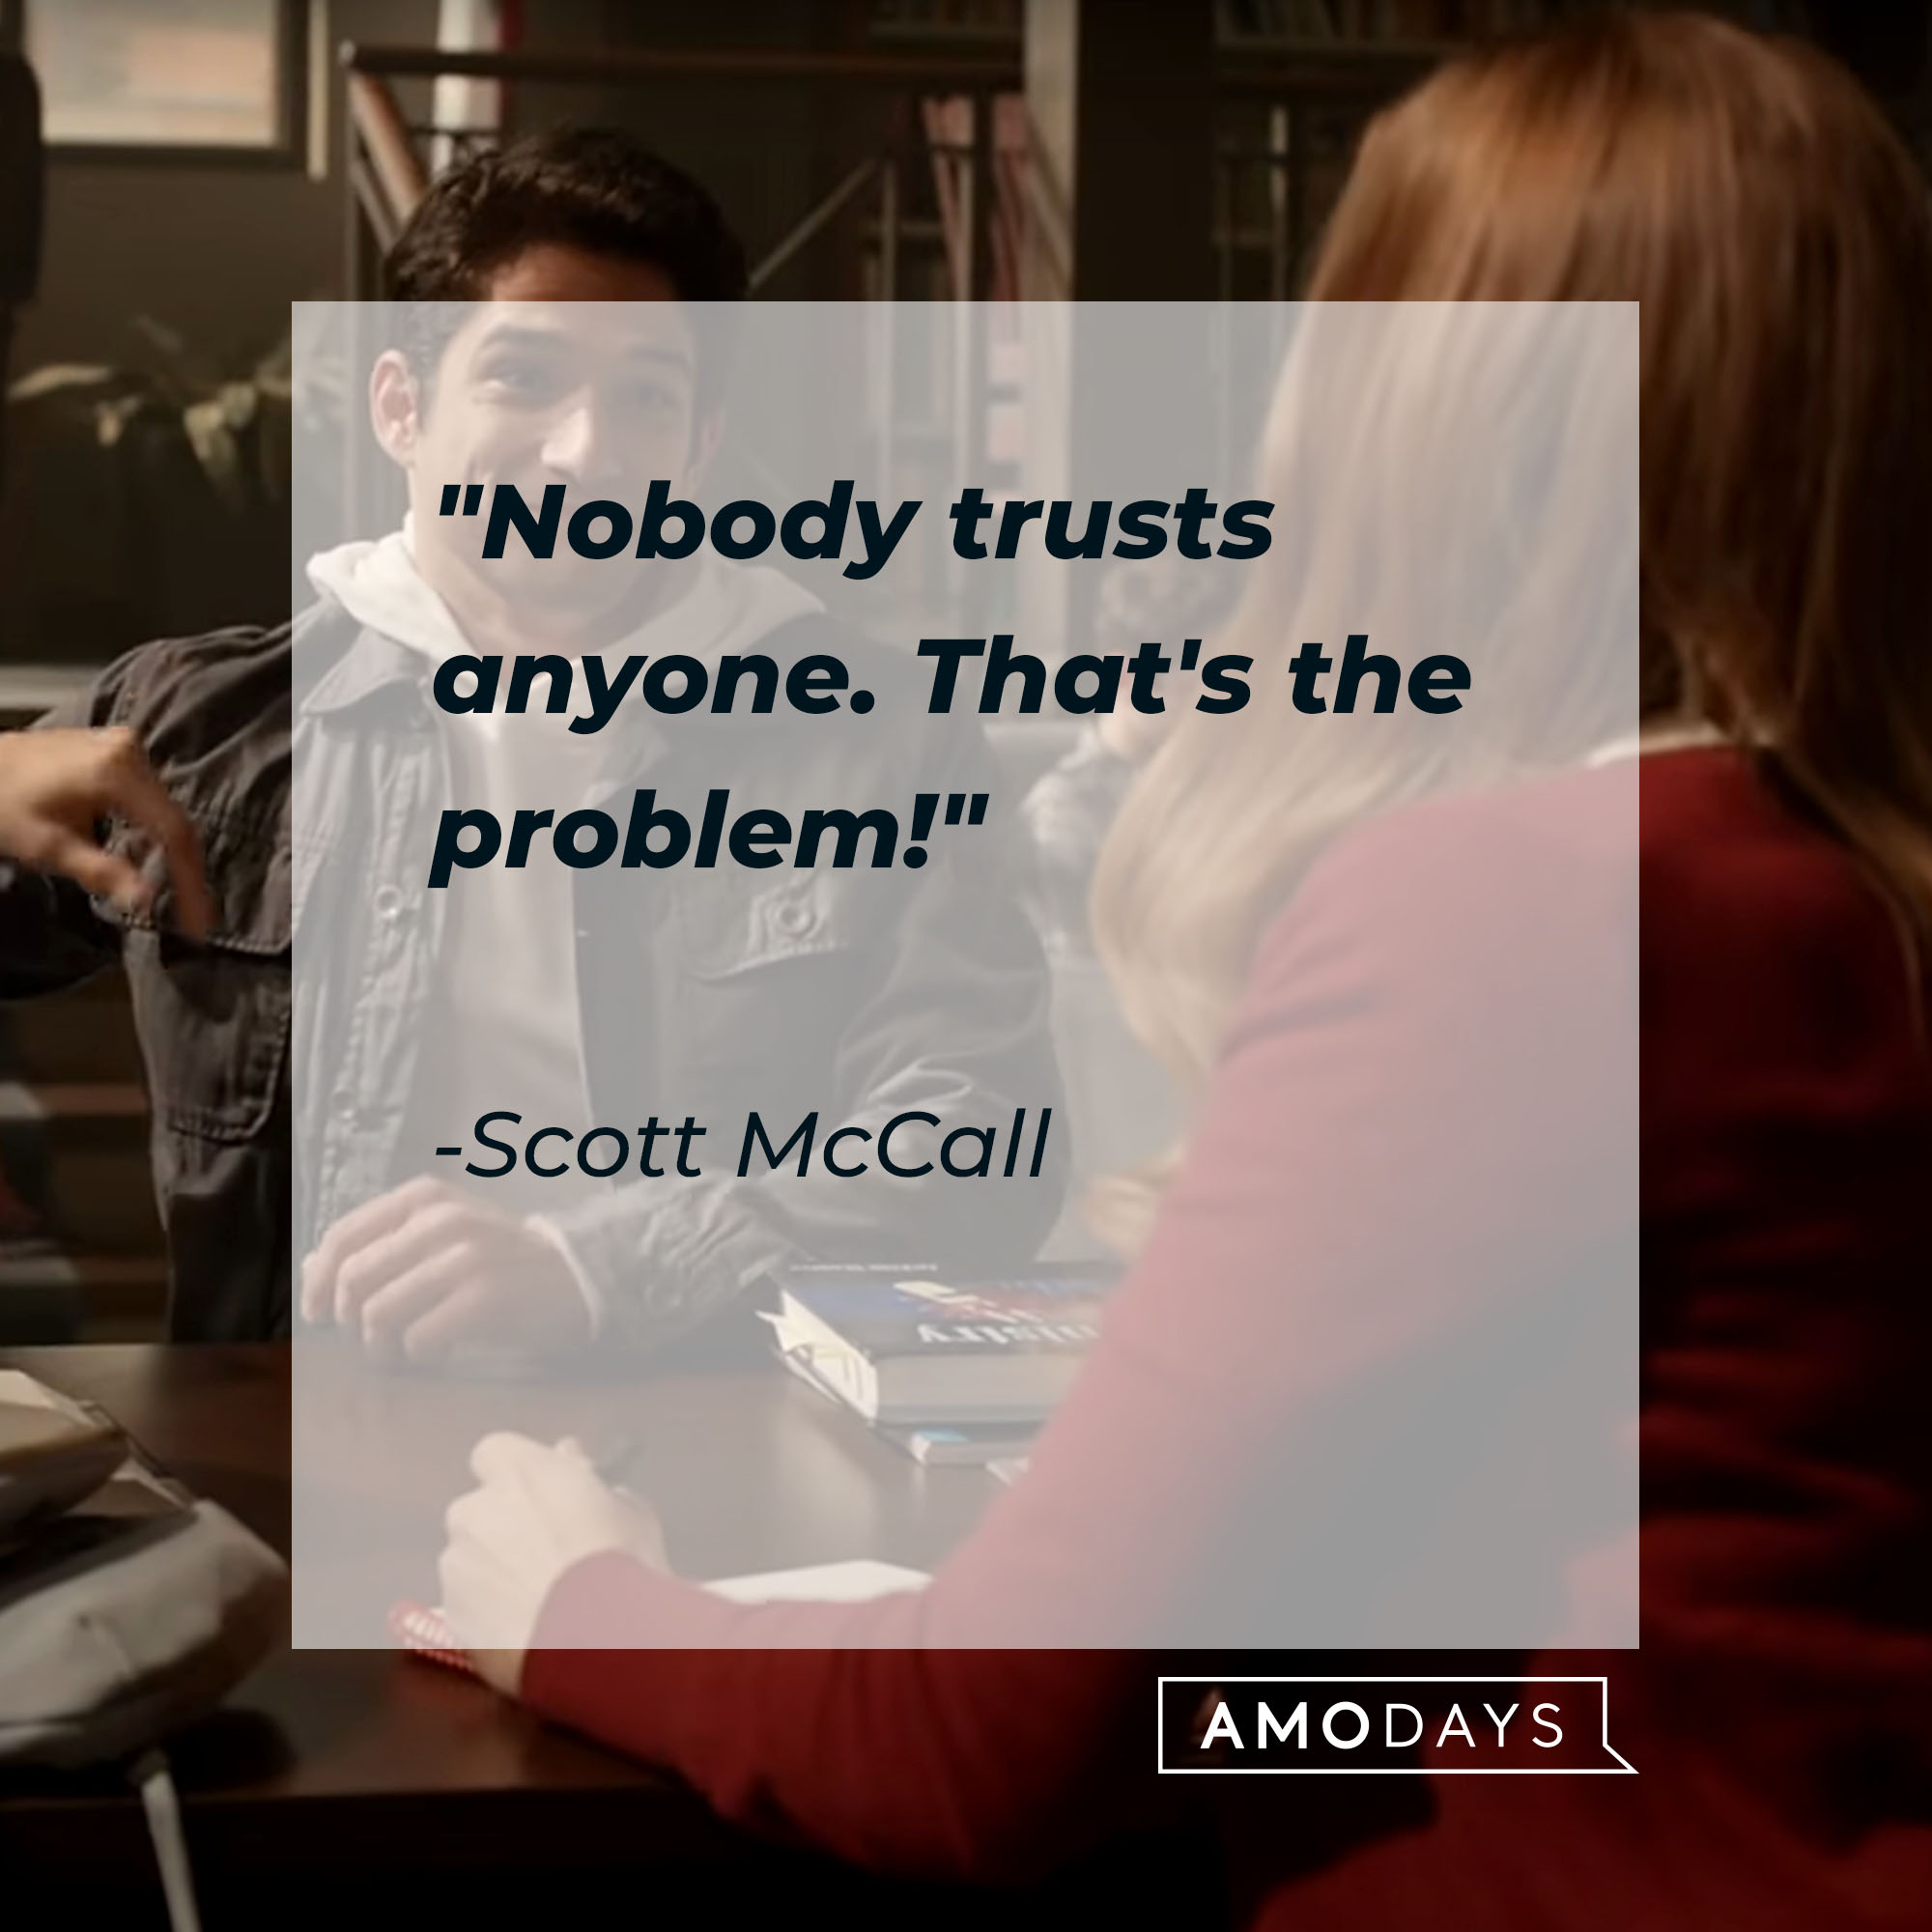 Scott McCall's quote: "Nobody trusts anyone. That's the problem!" | Source: Youtube.com/WolfWatch